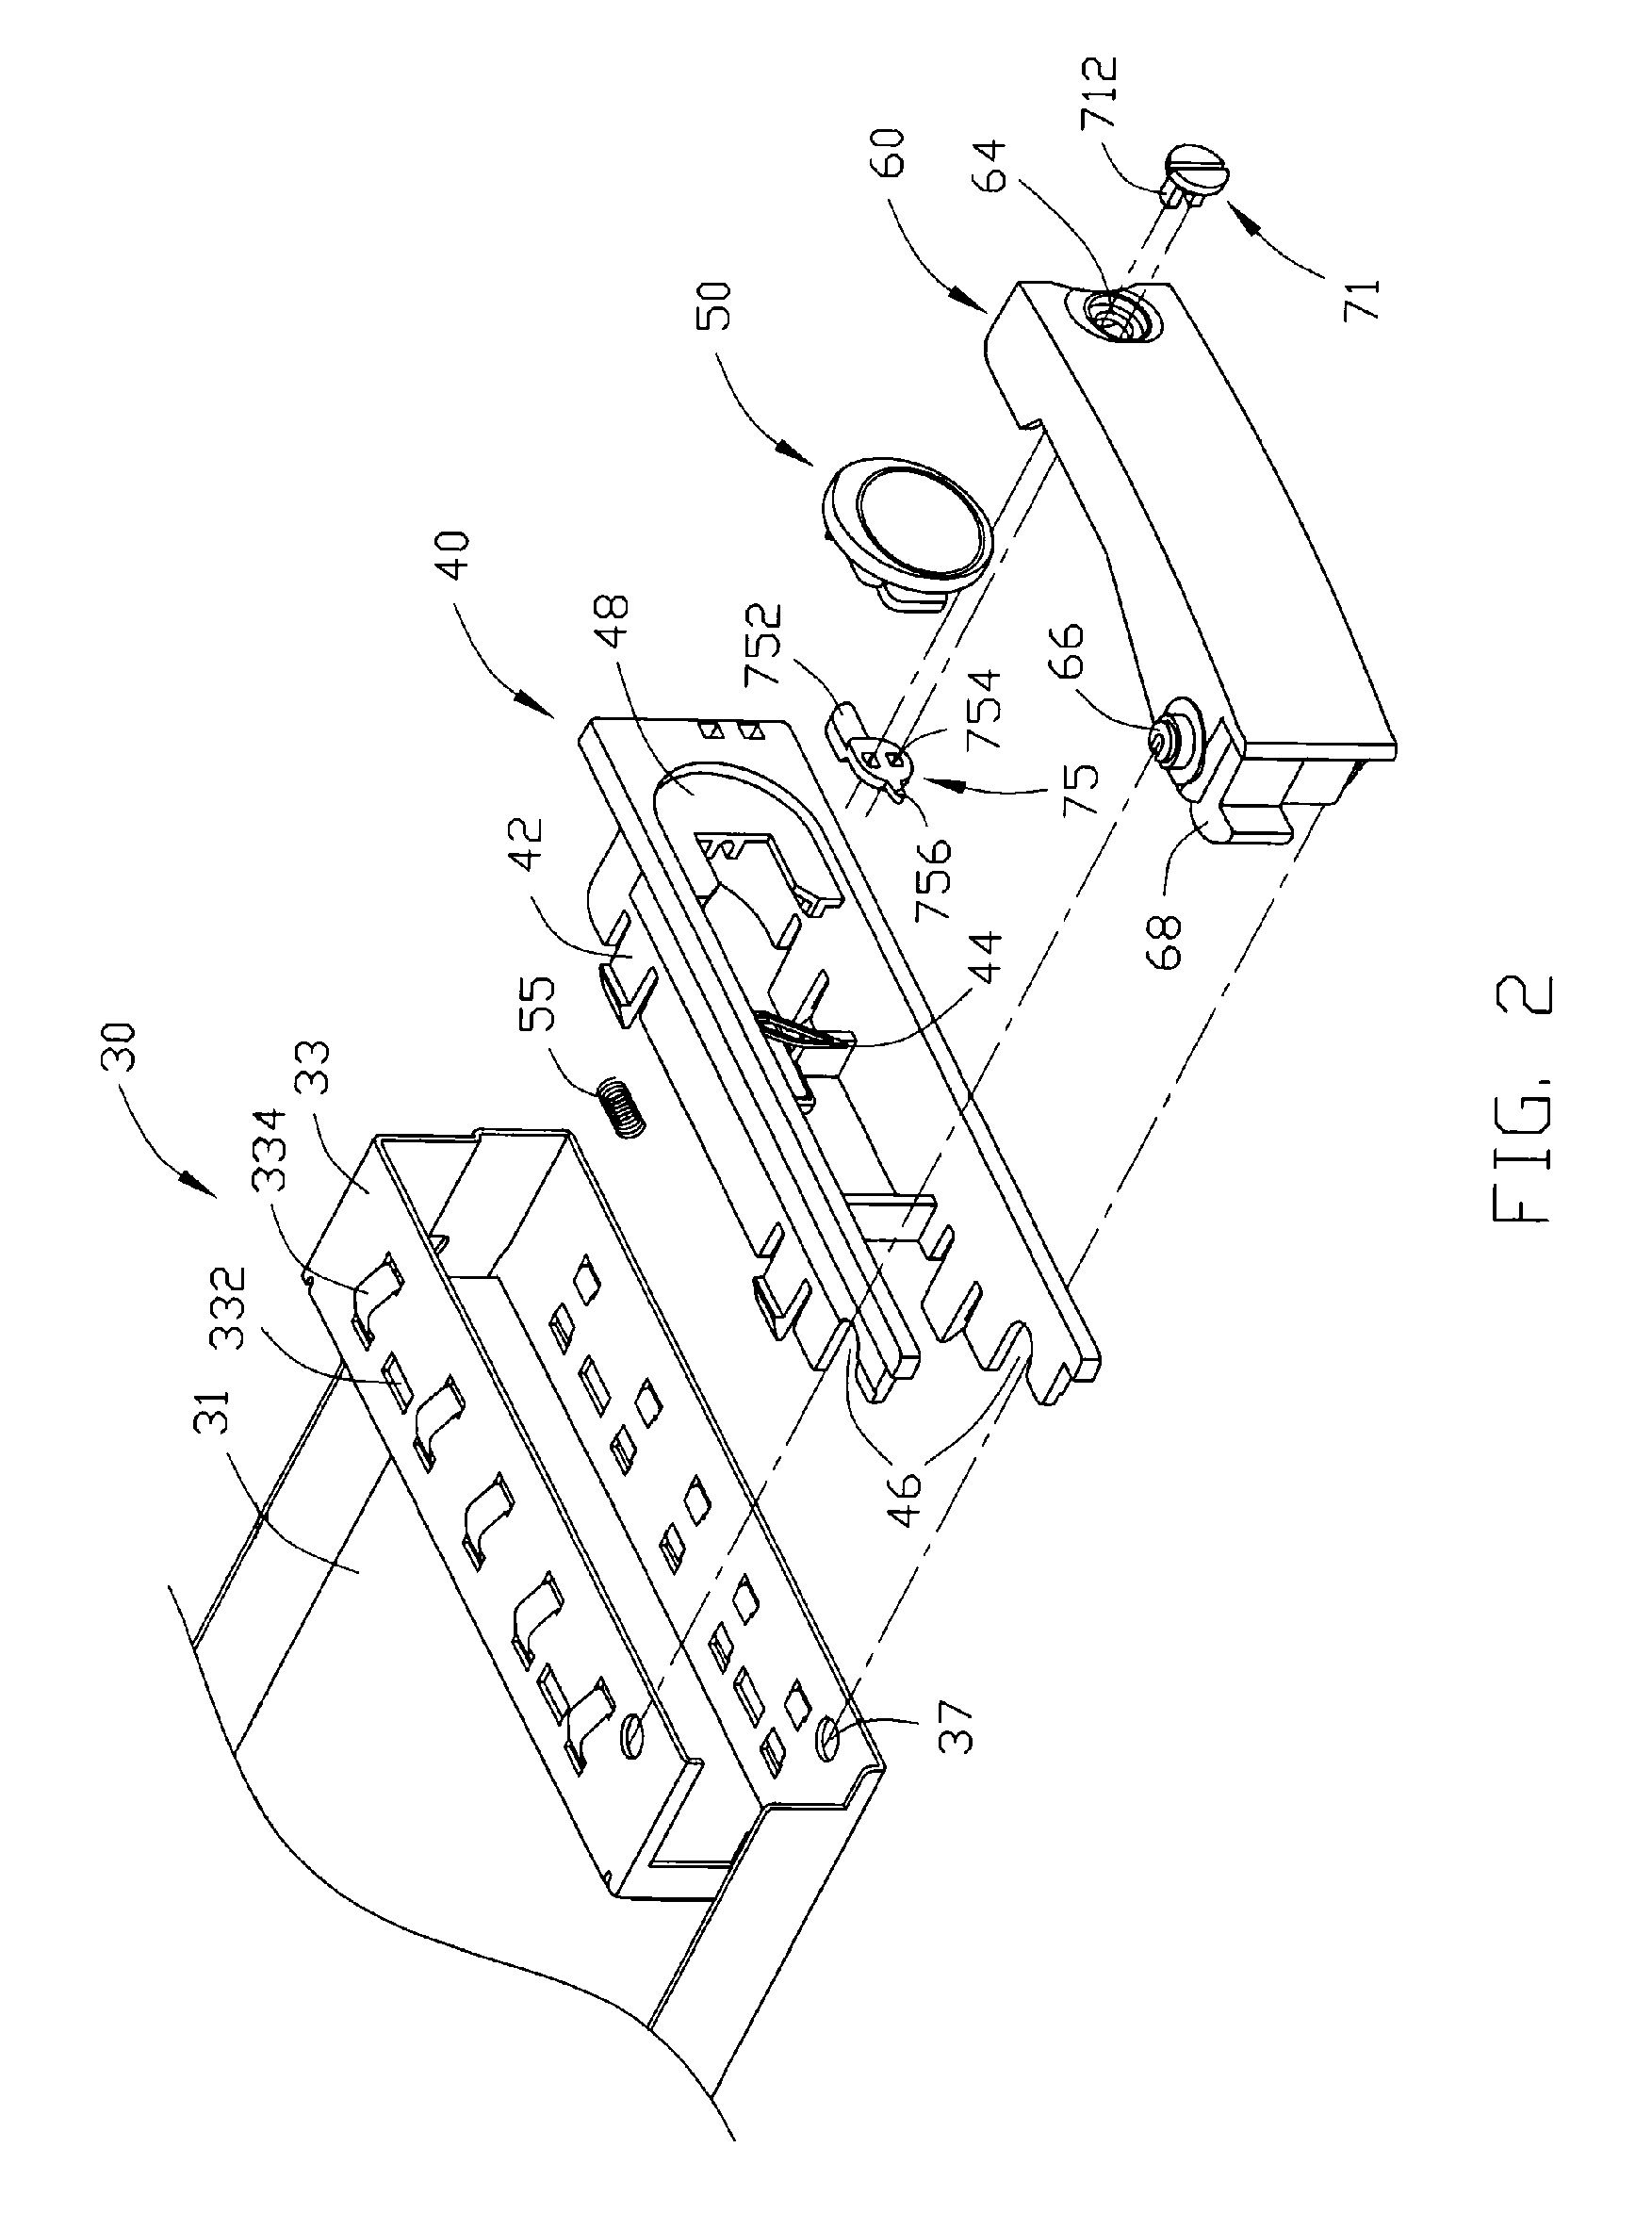 Disk drive carrier assembly